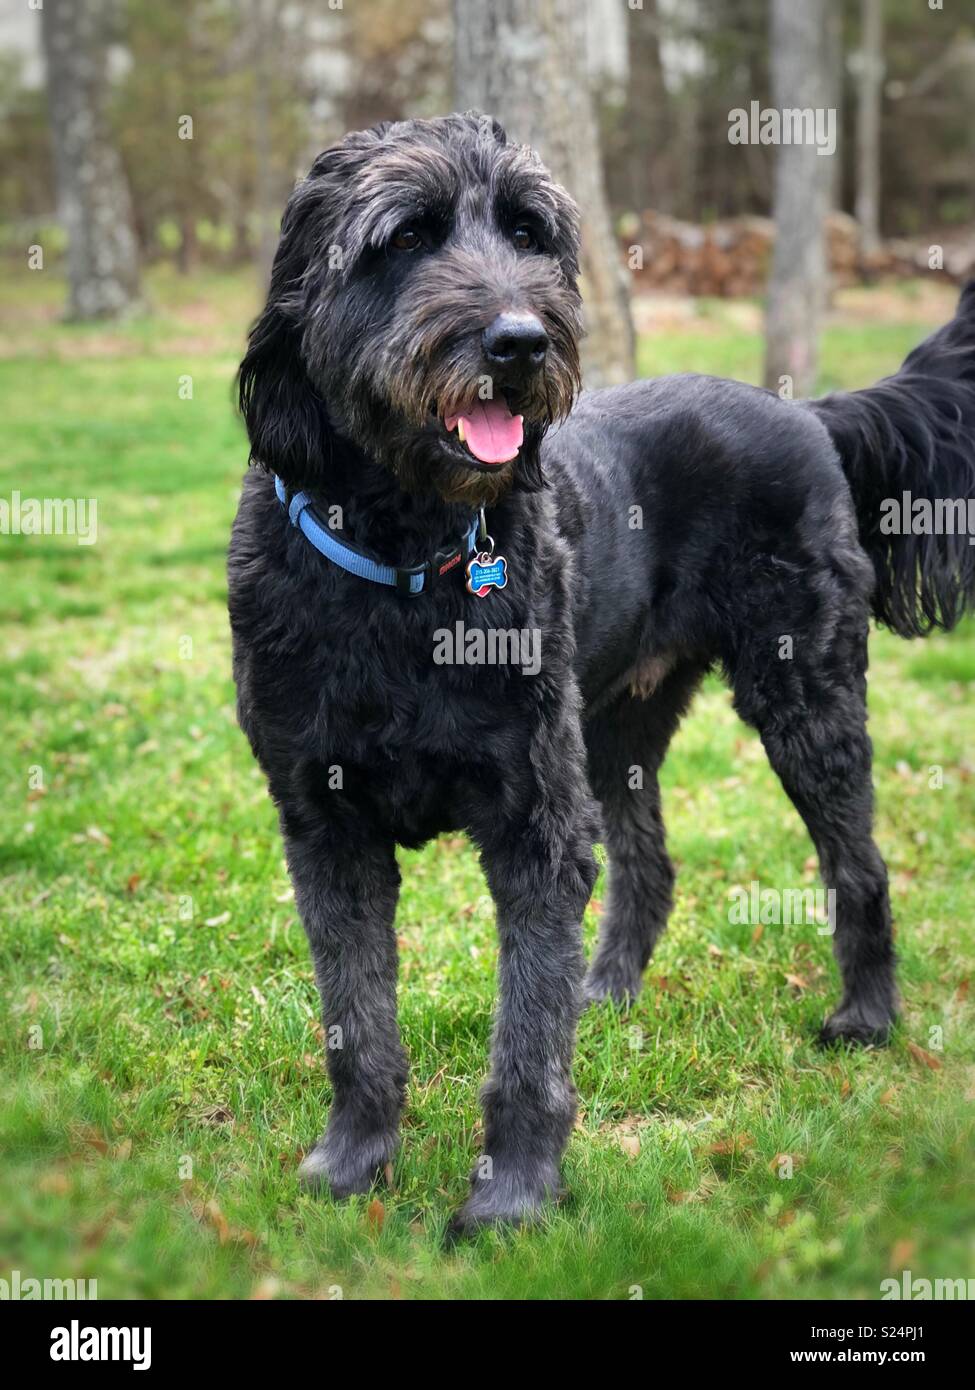 Black Australian Shepard Standard Poodle Mix “Aussie-doodle” adult male  dog, standing, cute, medium thick shaggy hair, looking calm, in grassy  field with trees Stock Photo - Alamy